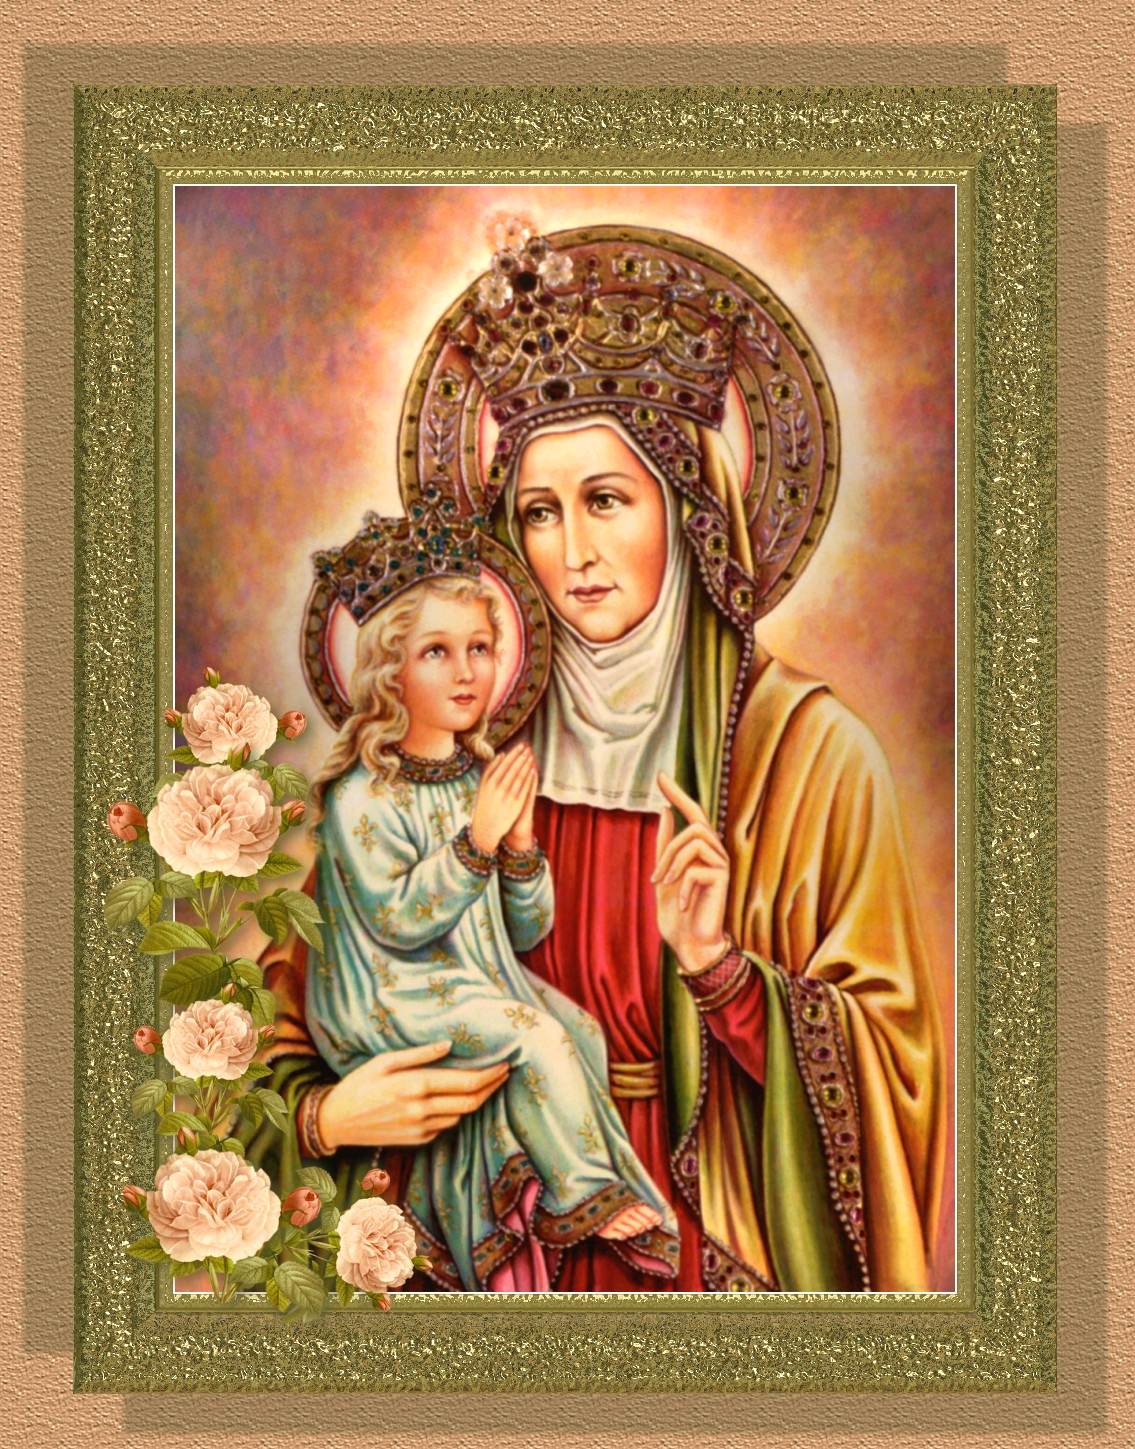 SAINT ANNE WITH ROSES